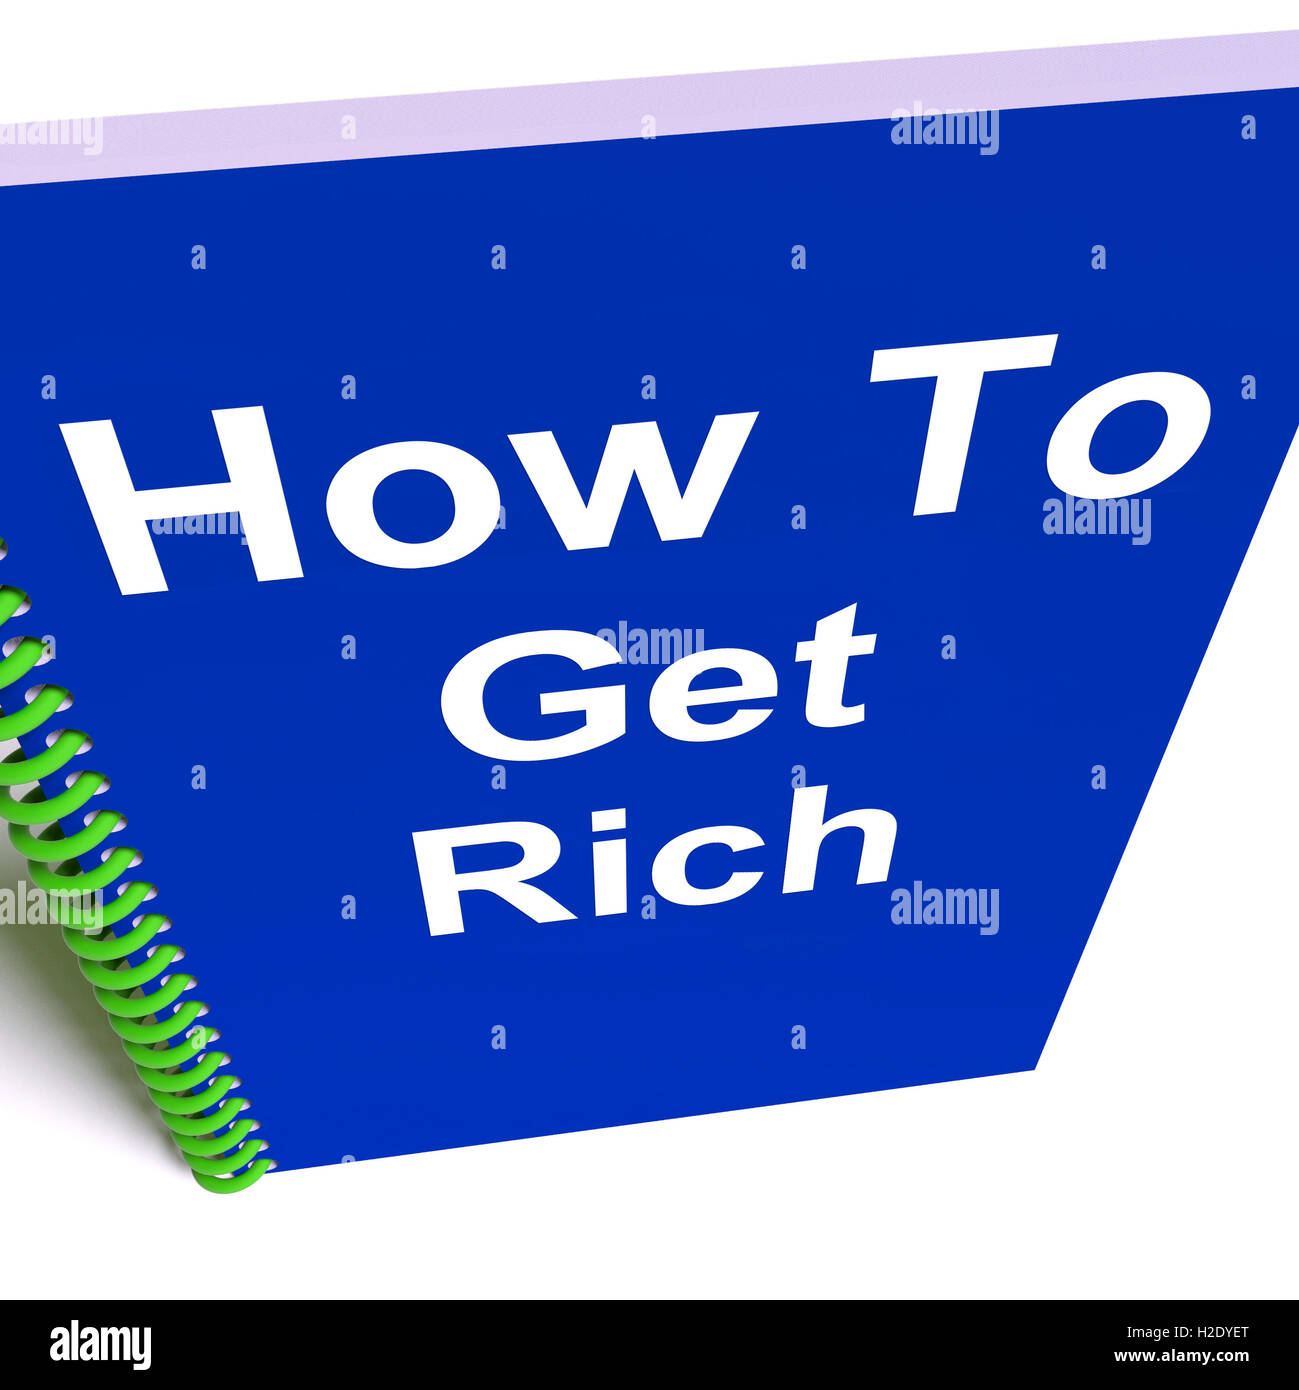 How to Get Rich on Notebook Represents Getting Wealthy Stock Photo